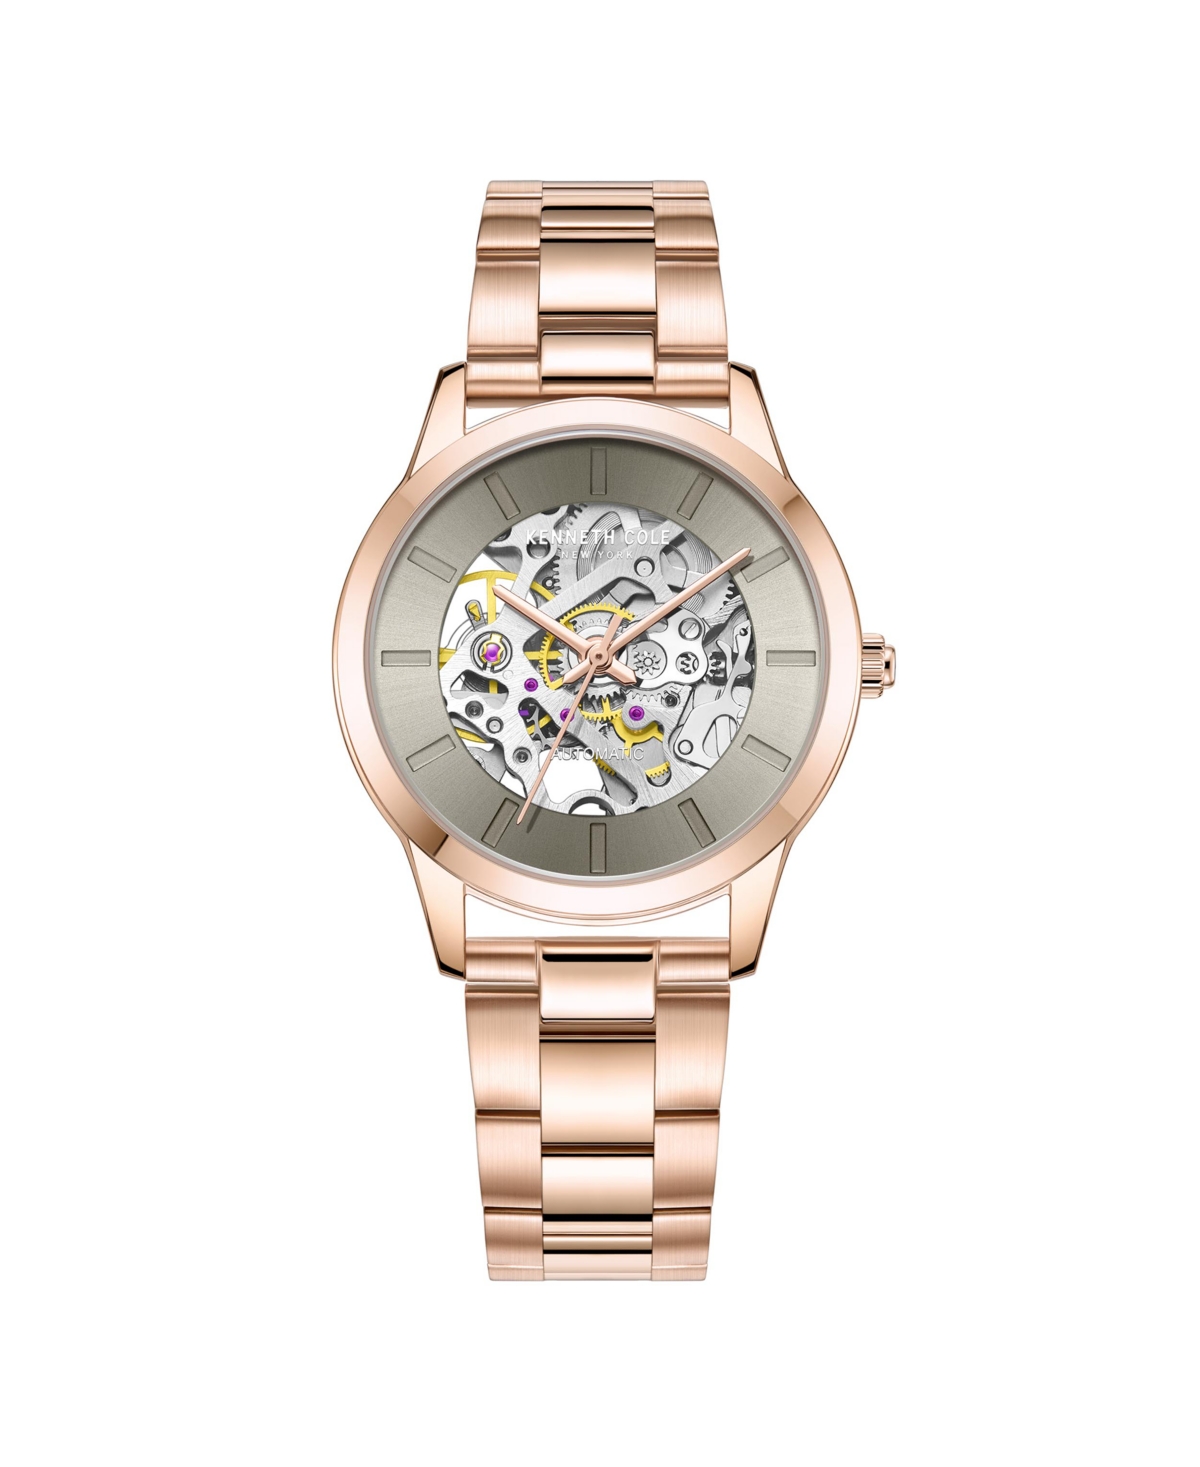 Women's Automatic Rose Gold-Tone Stainless Steel Watch, 36mm - Rose Gold